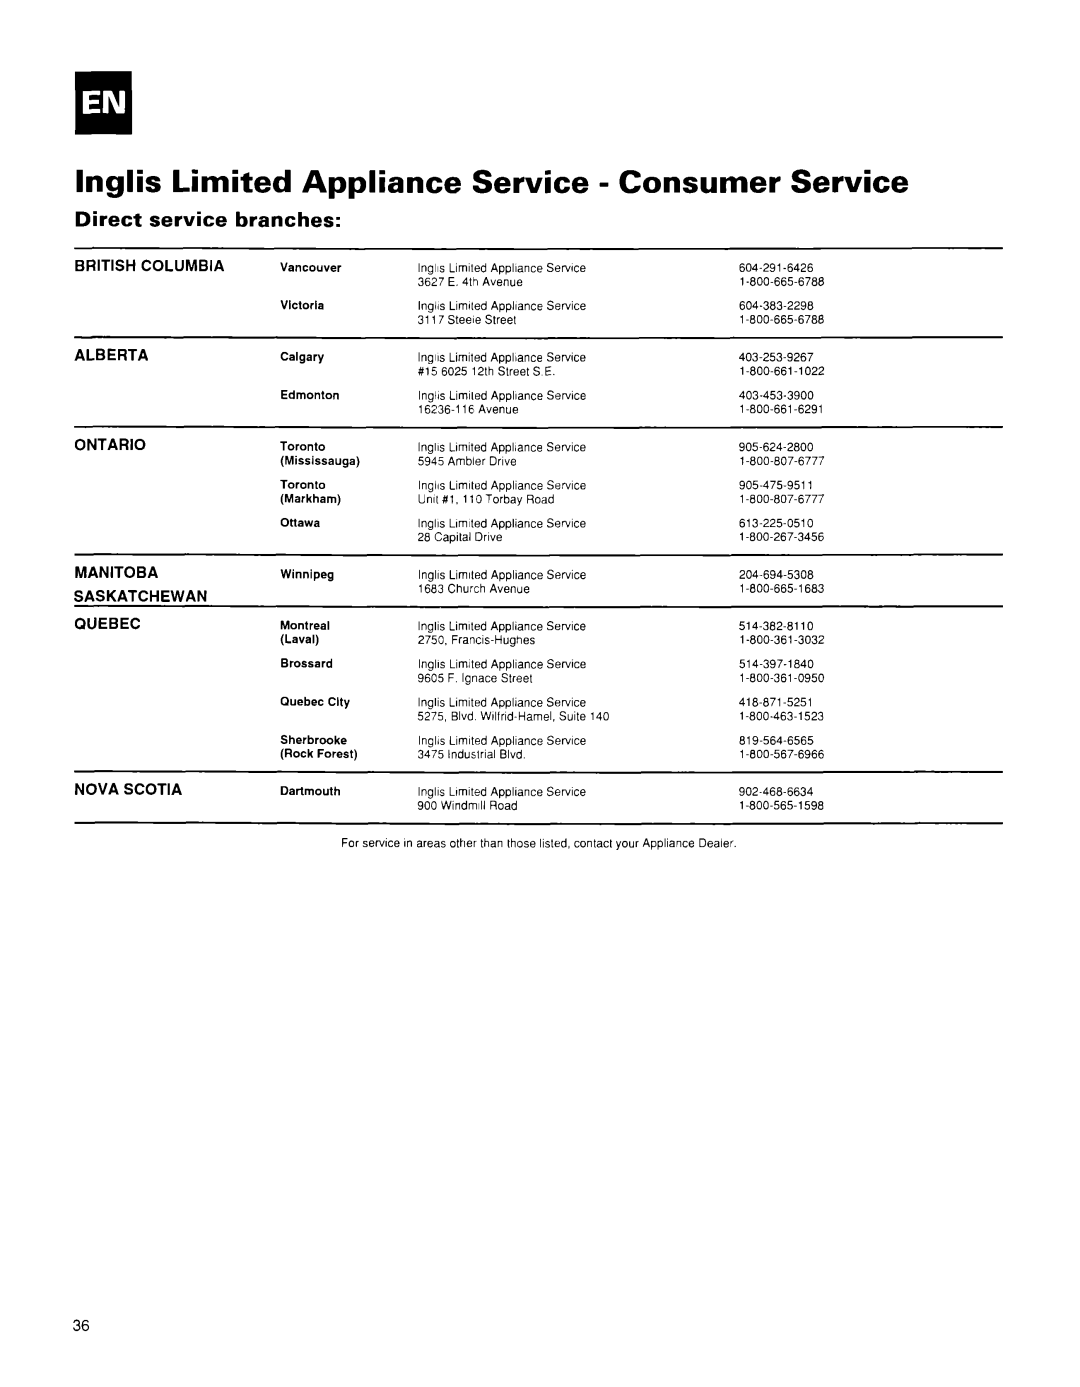 Whirlpool BHAC0600BS0 manual lnglis, Limited, Service, Consumer, Appliance, Direct, branches 